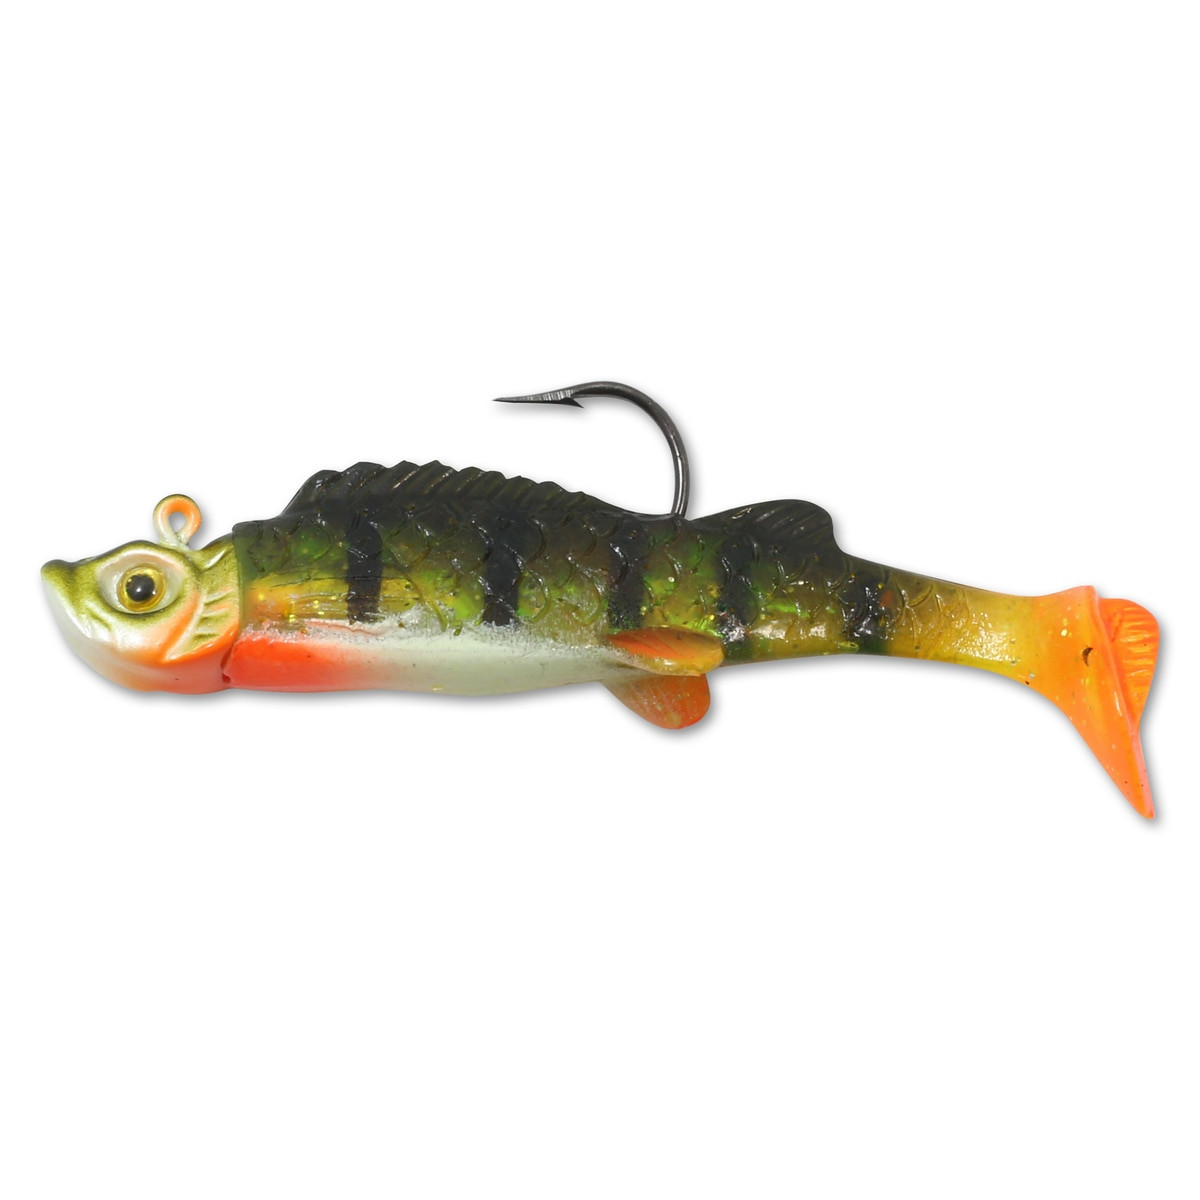 Fishing Rattle, Jig Tough Rattle with Sensitive Action